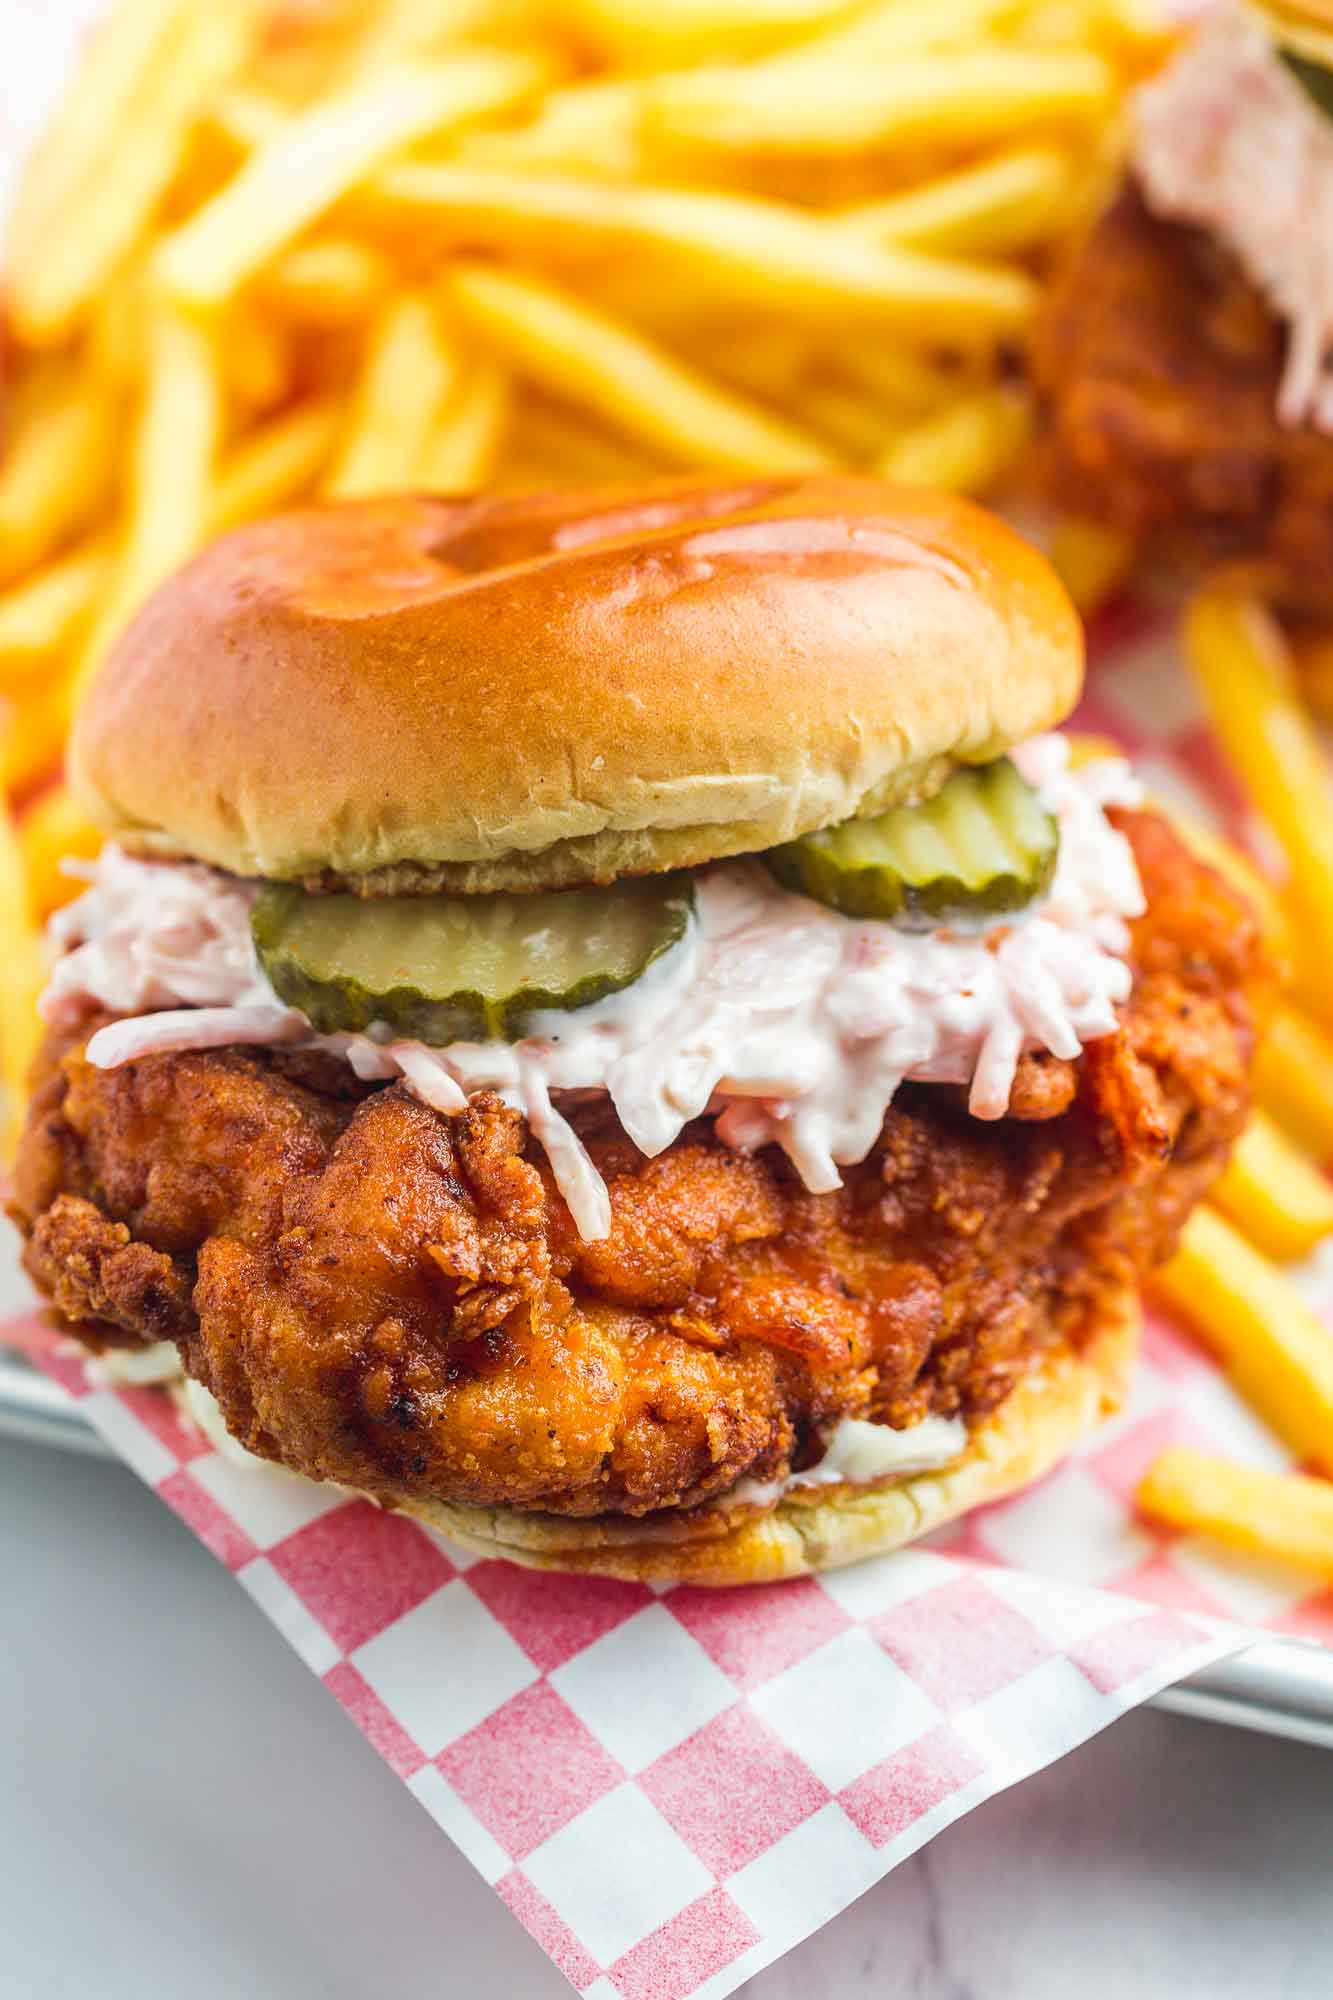 Nashvile-style hot chicken sandwich with coleslaw and pickle chips. 